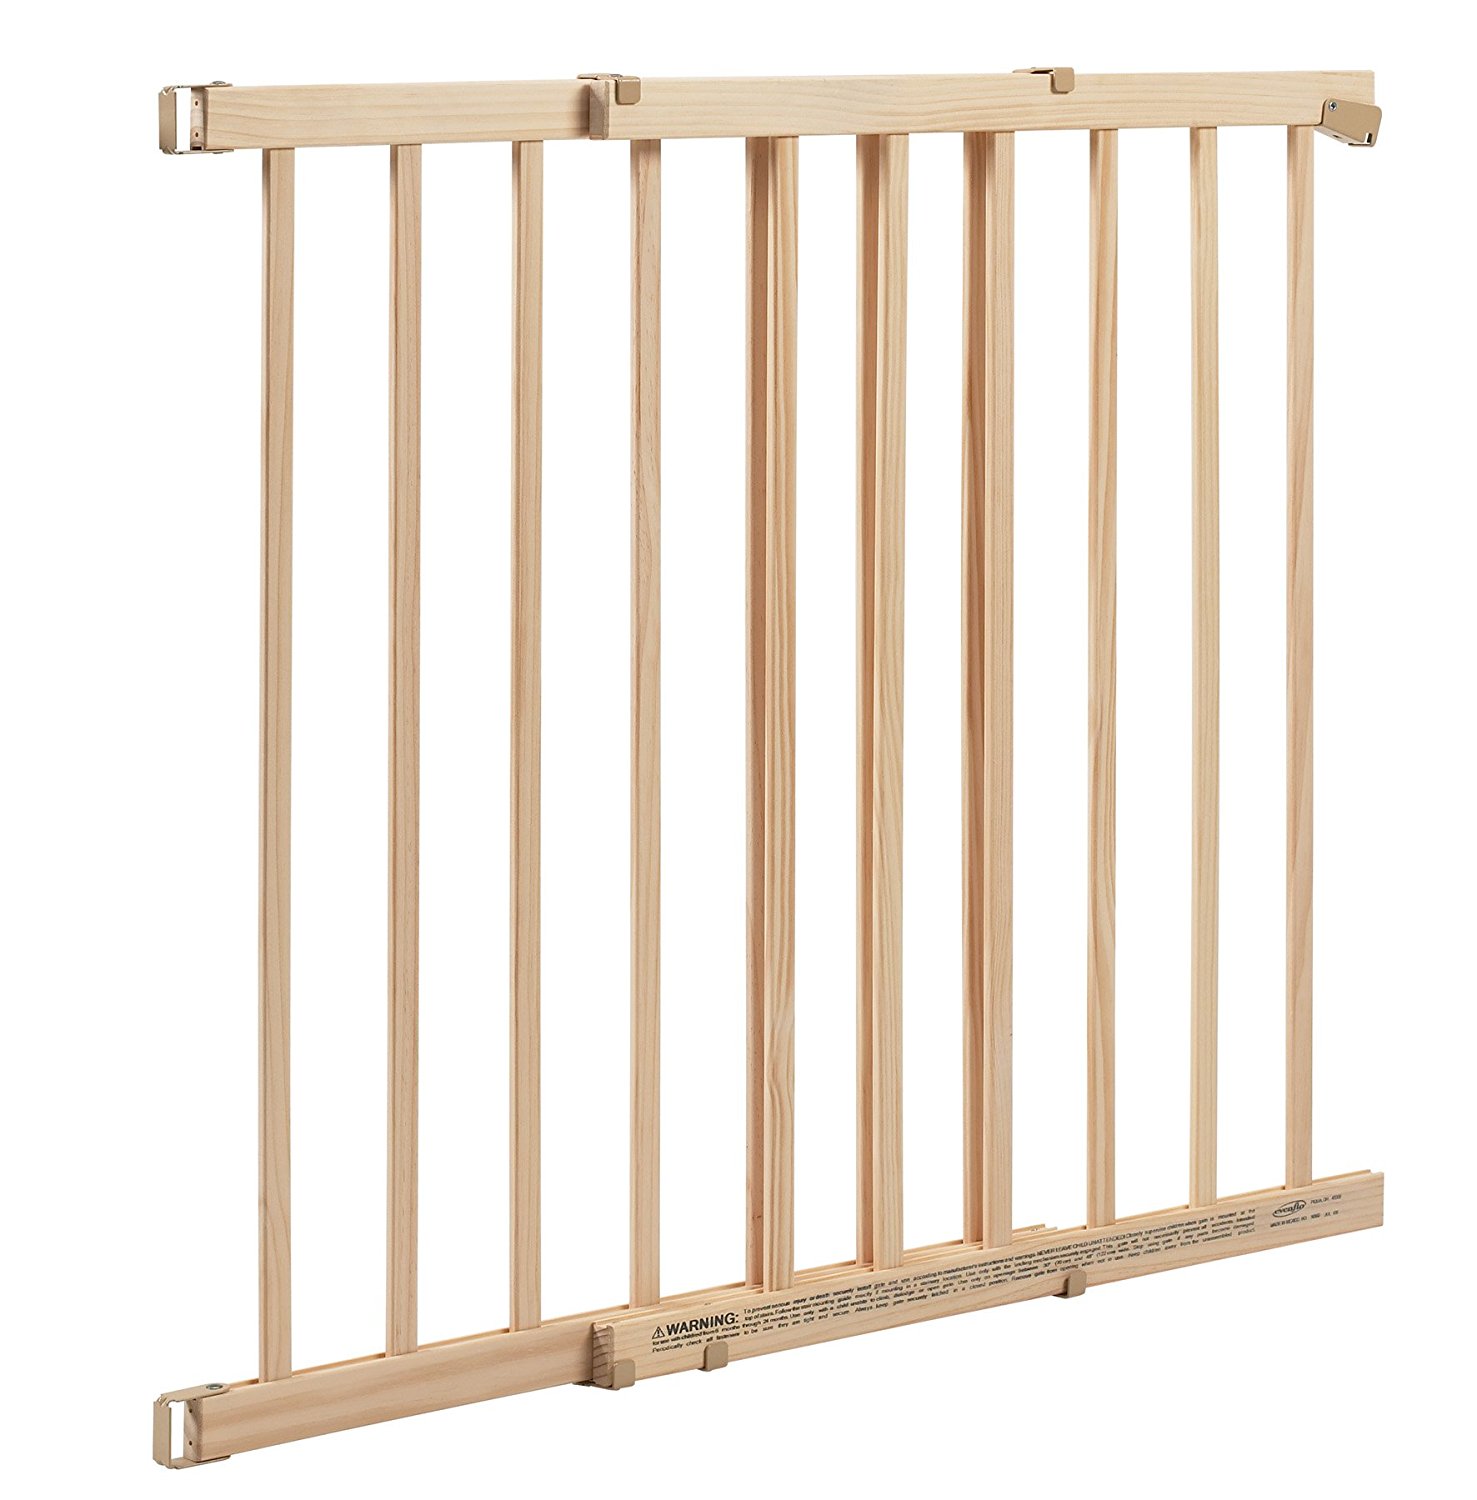 evenflo top of stair plus gate, best baby gates for stairs, baby gates for stairs, gates for top of stairs, safety gates, best safety gates, wood safety gates